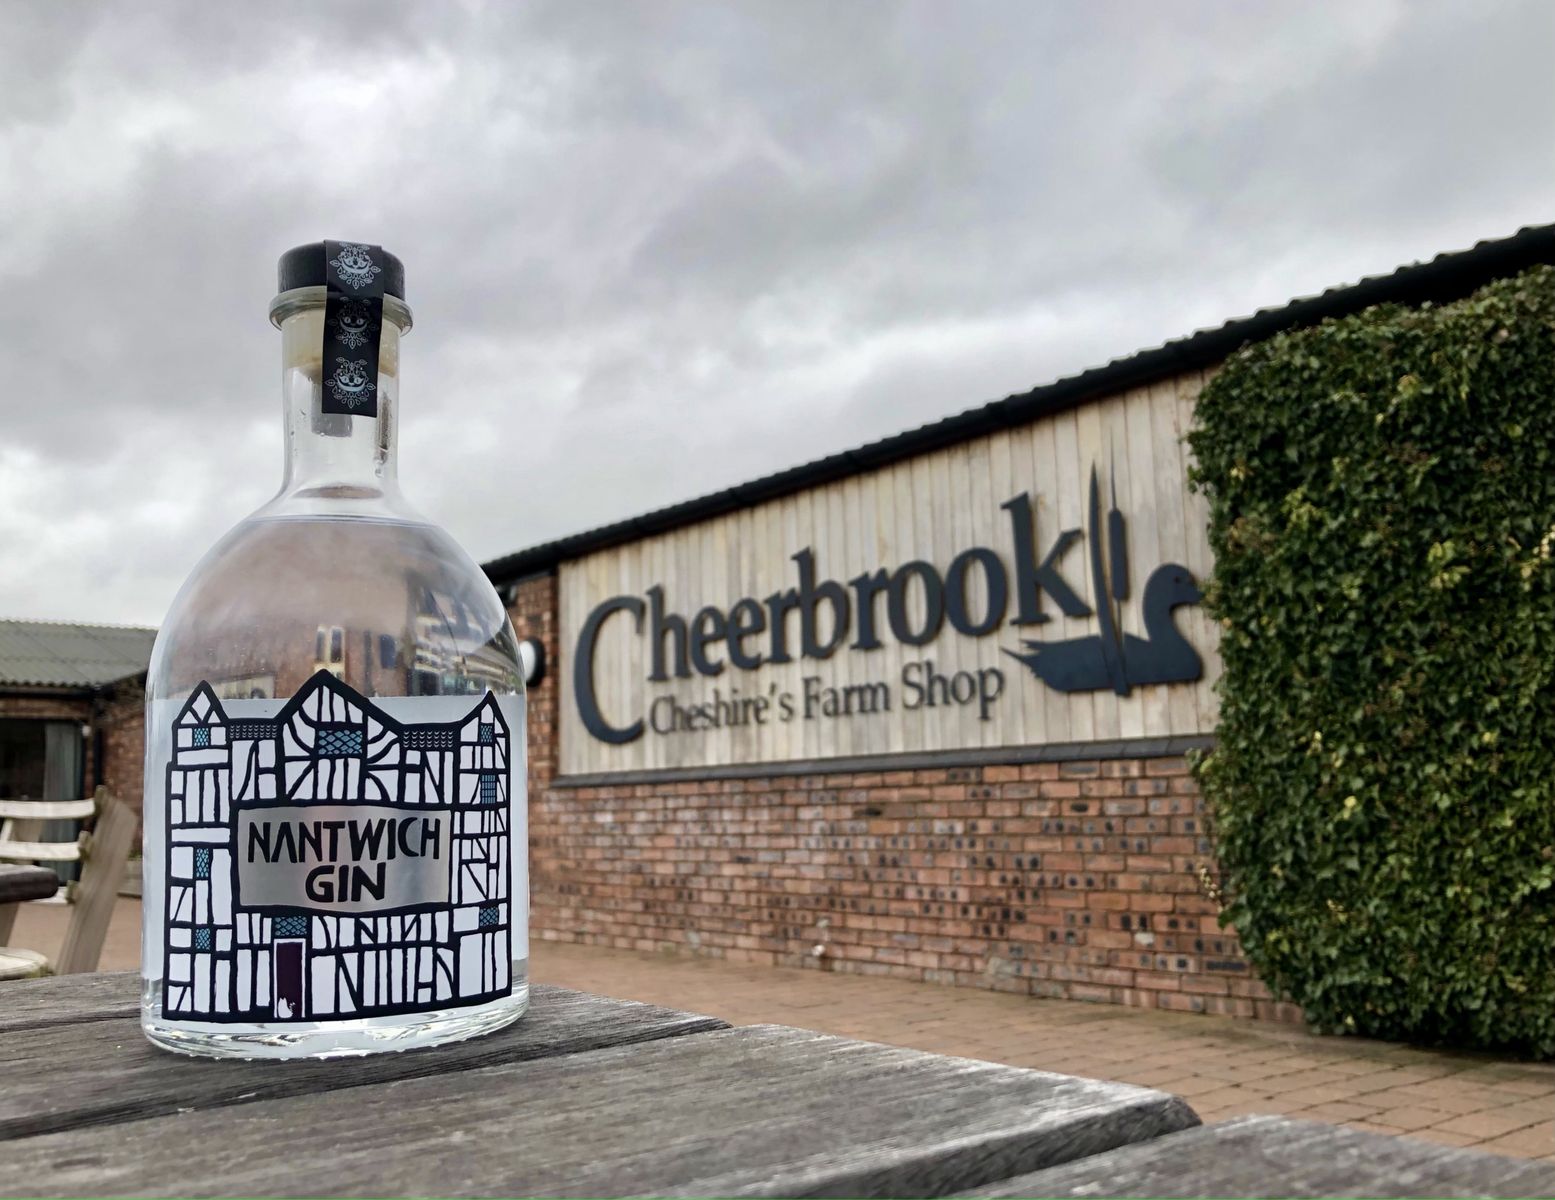 Nantwich Gin - available at Cheerbrook Farm Shop